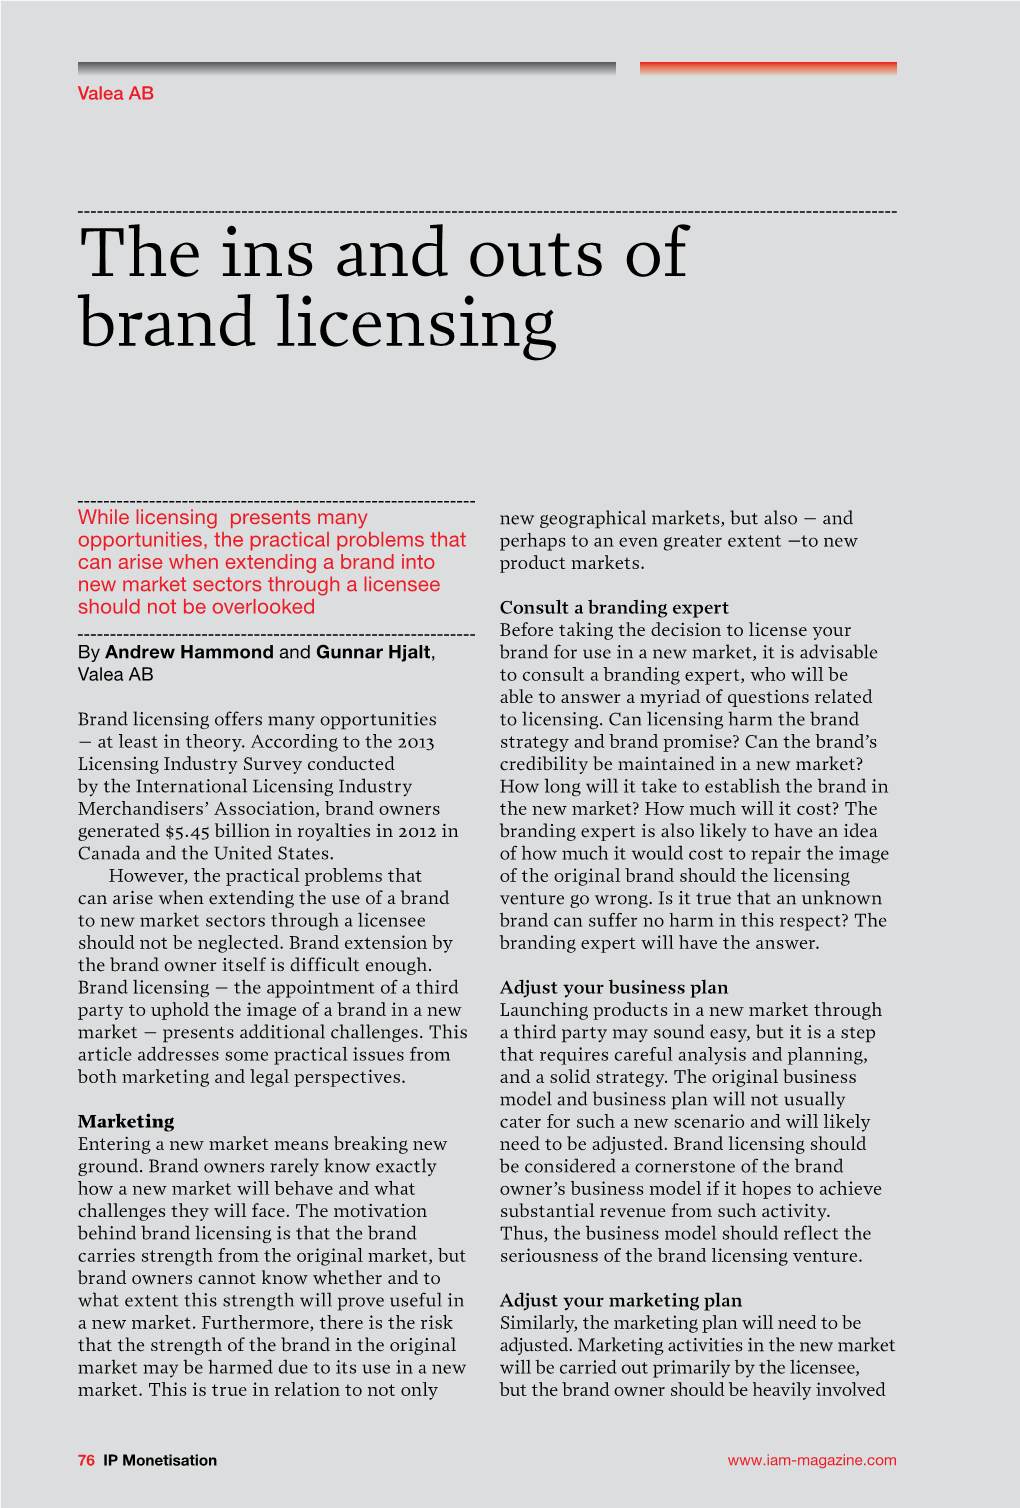 The Ins and Outs of Brand Licensing